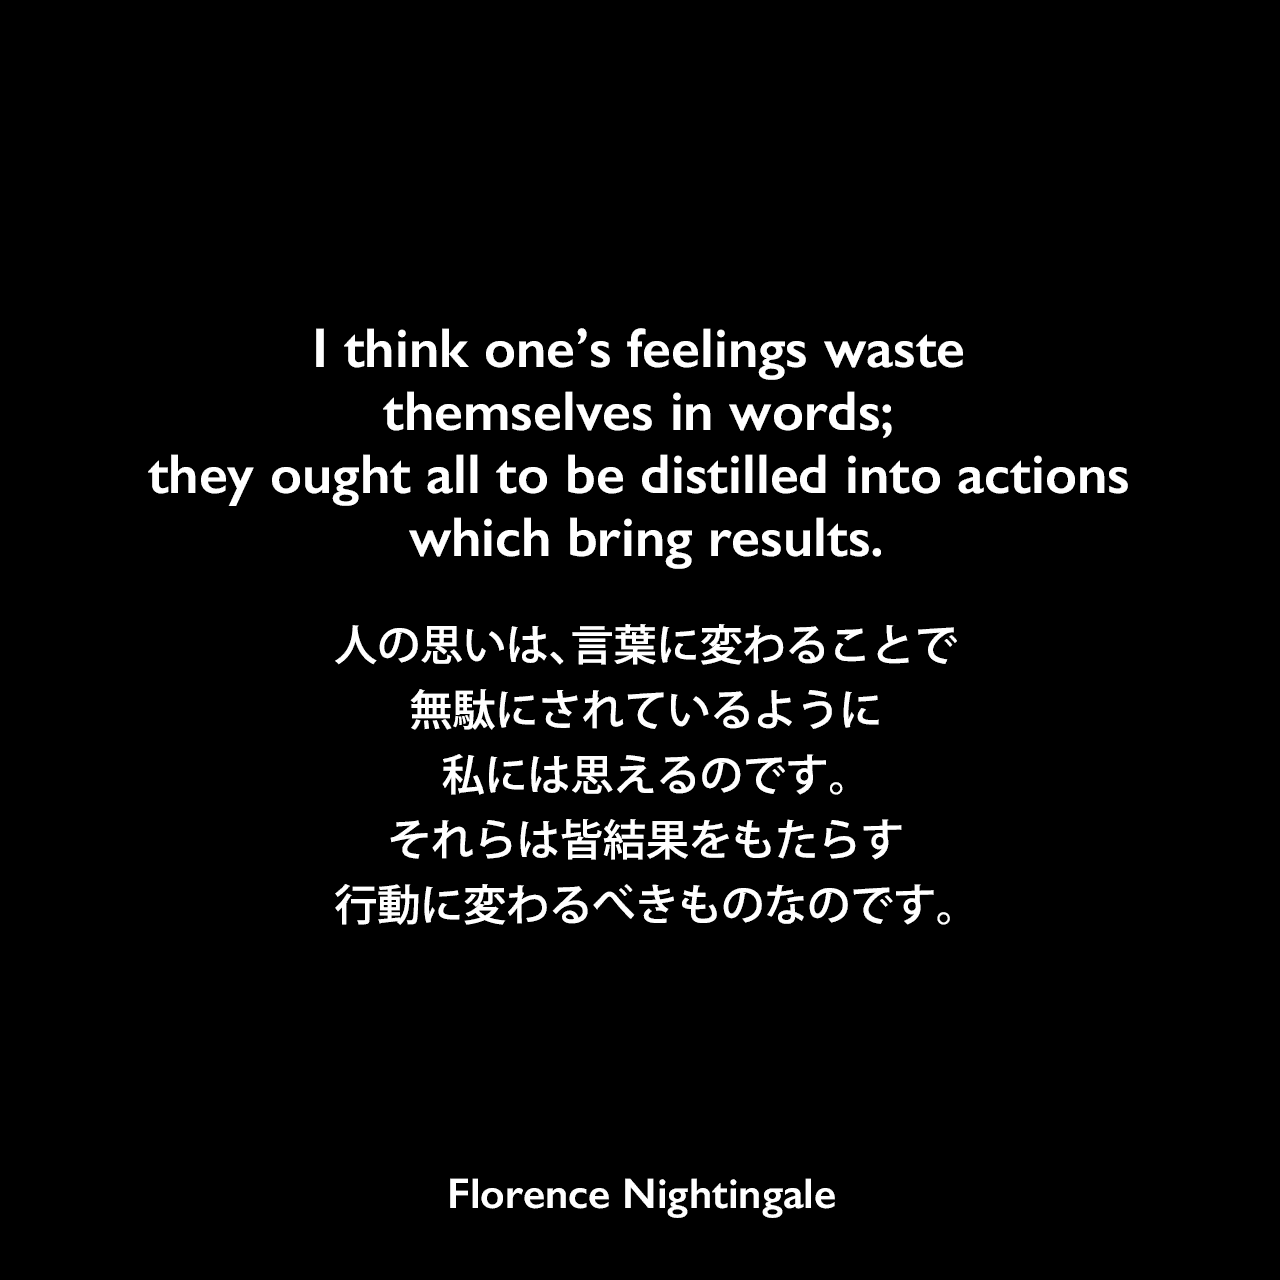 I think one’s feelings waste themselves in words; they ought all to be distilled into actions which bring results.人の思いは、言葉に変わることで無駄にされているように、私には思えるのです。それらは皆、結果をもたらす行動に変わるべきものなのです。- 友人に宛てた手紙より